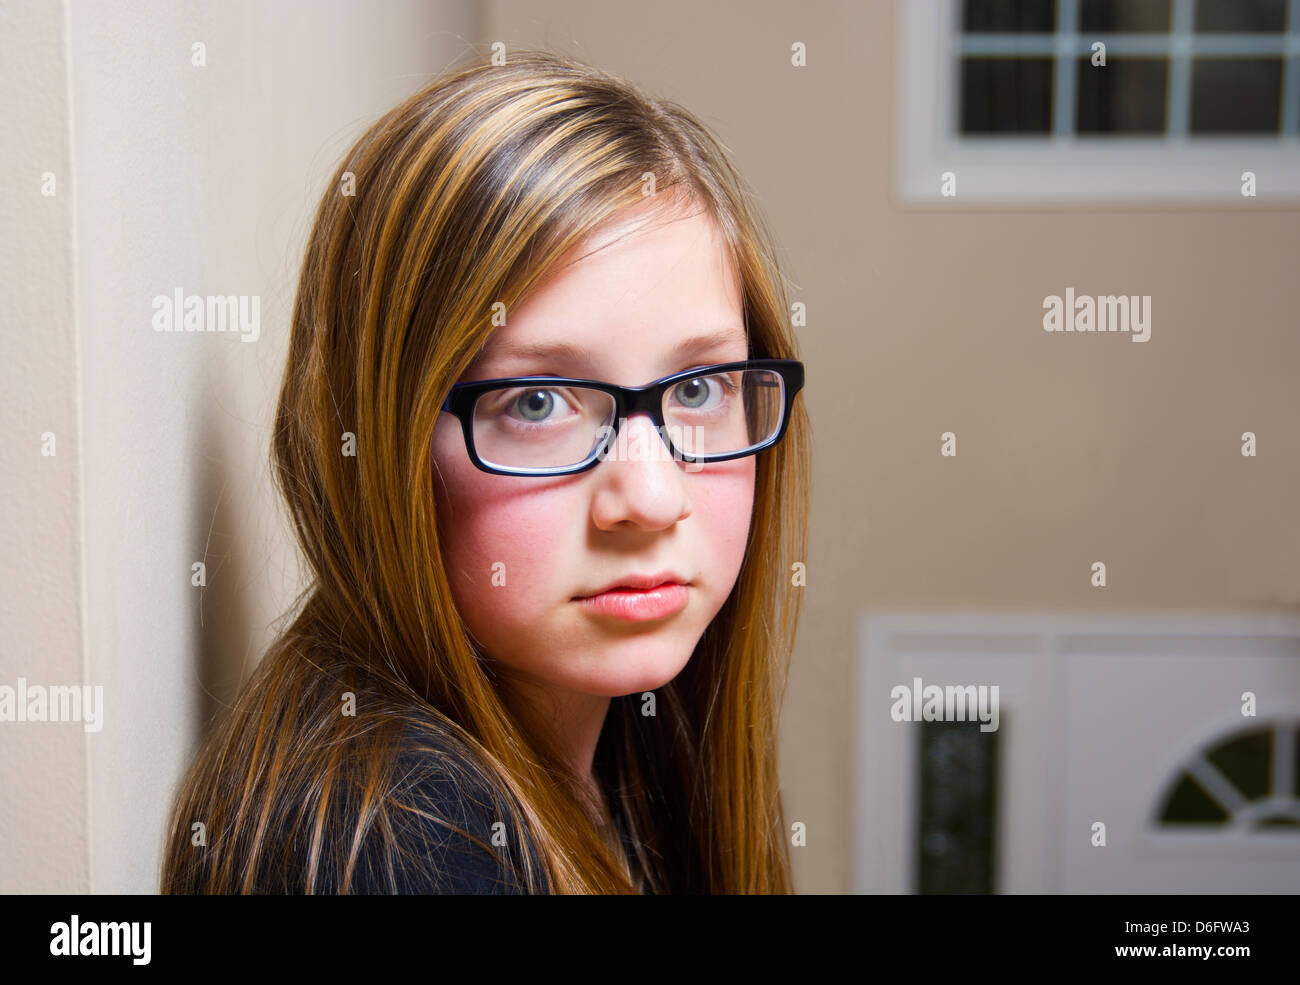 Serious young girl with glasses looking into camera. Stock Photo